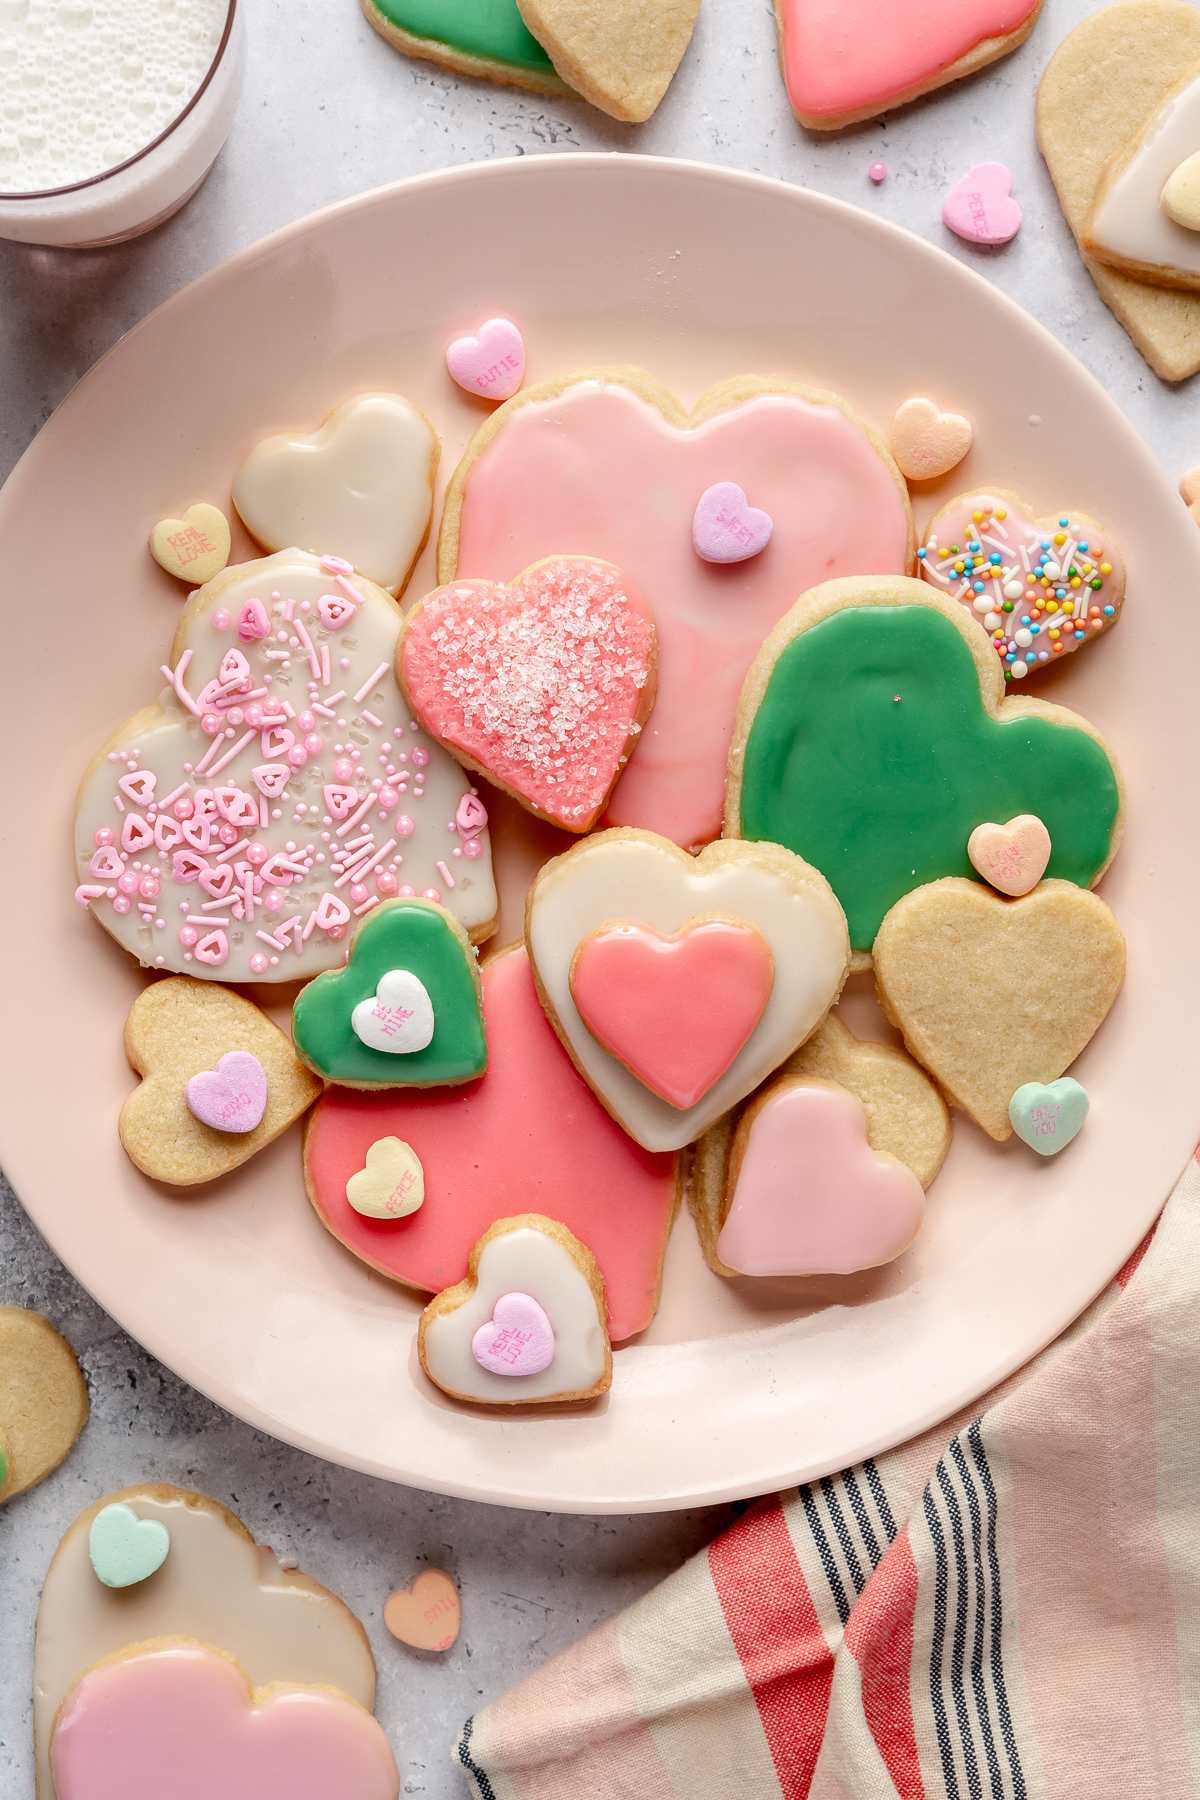 Heart shaped sugar cookies on a plate.